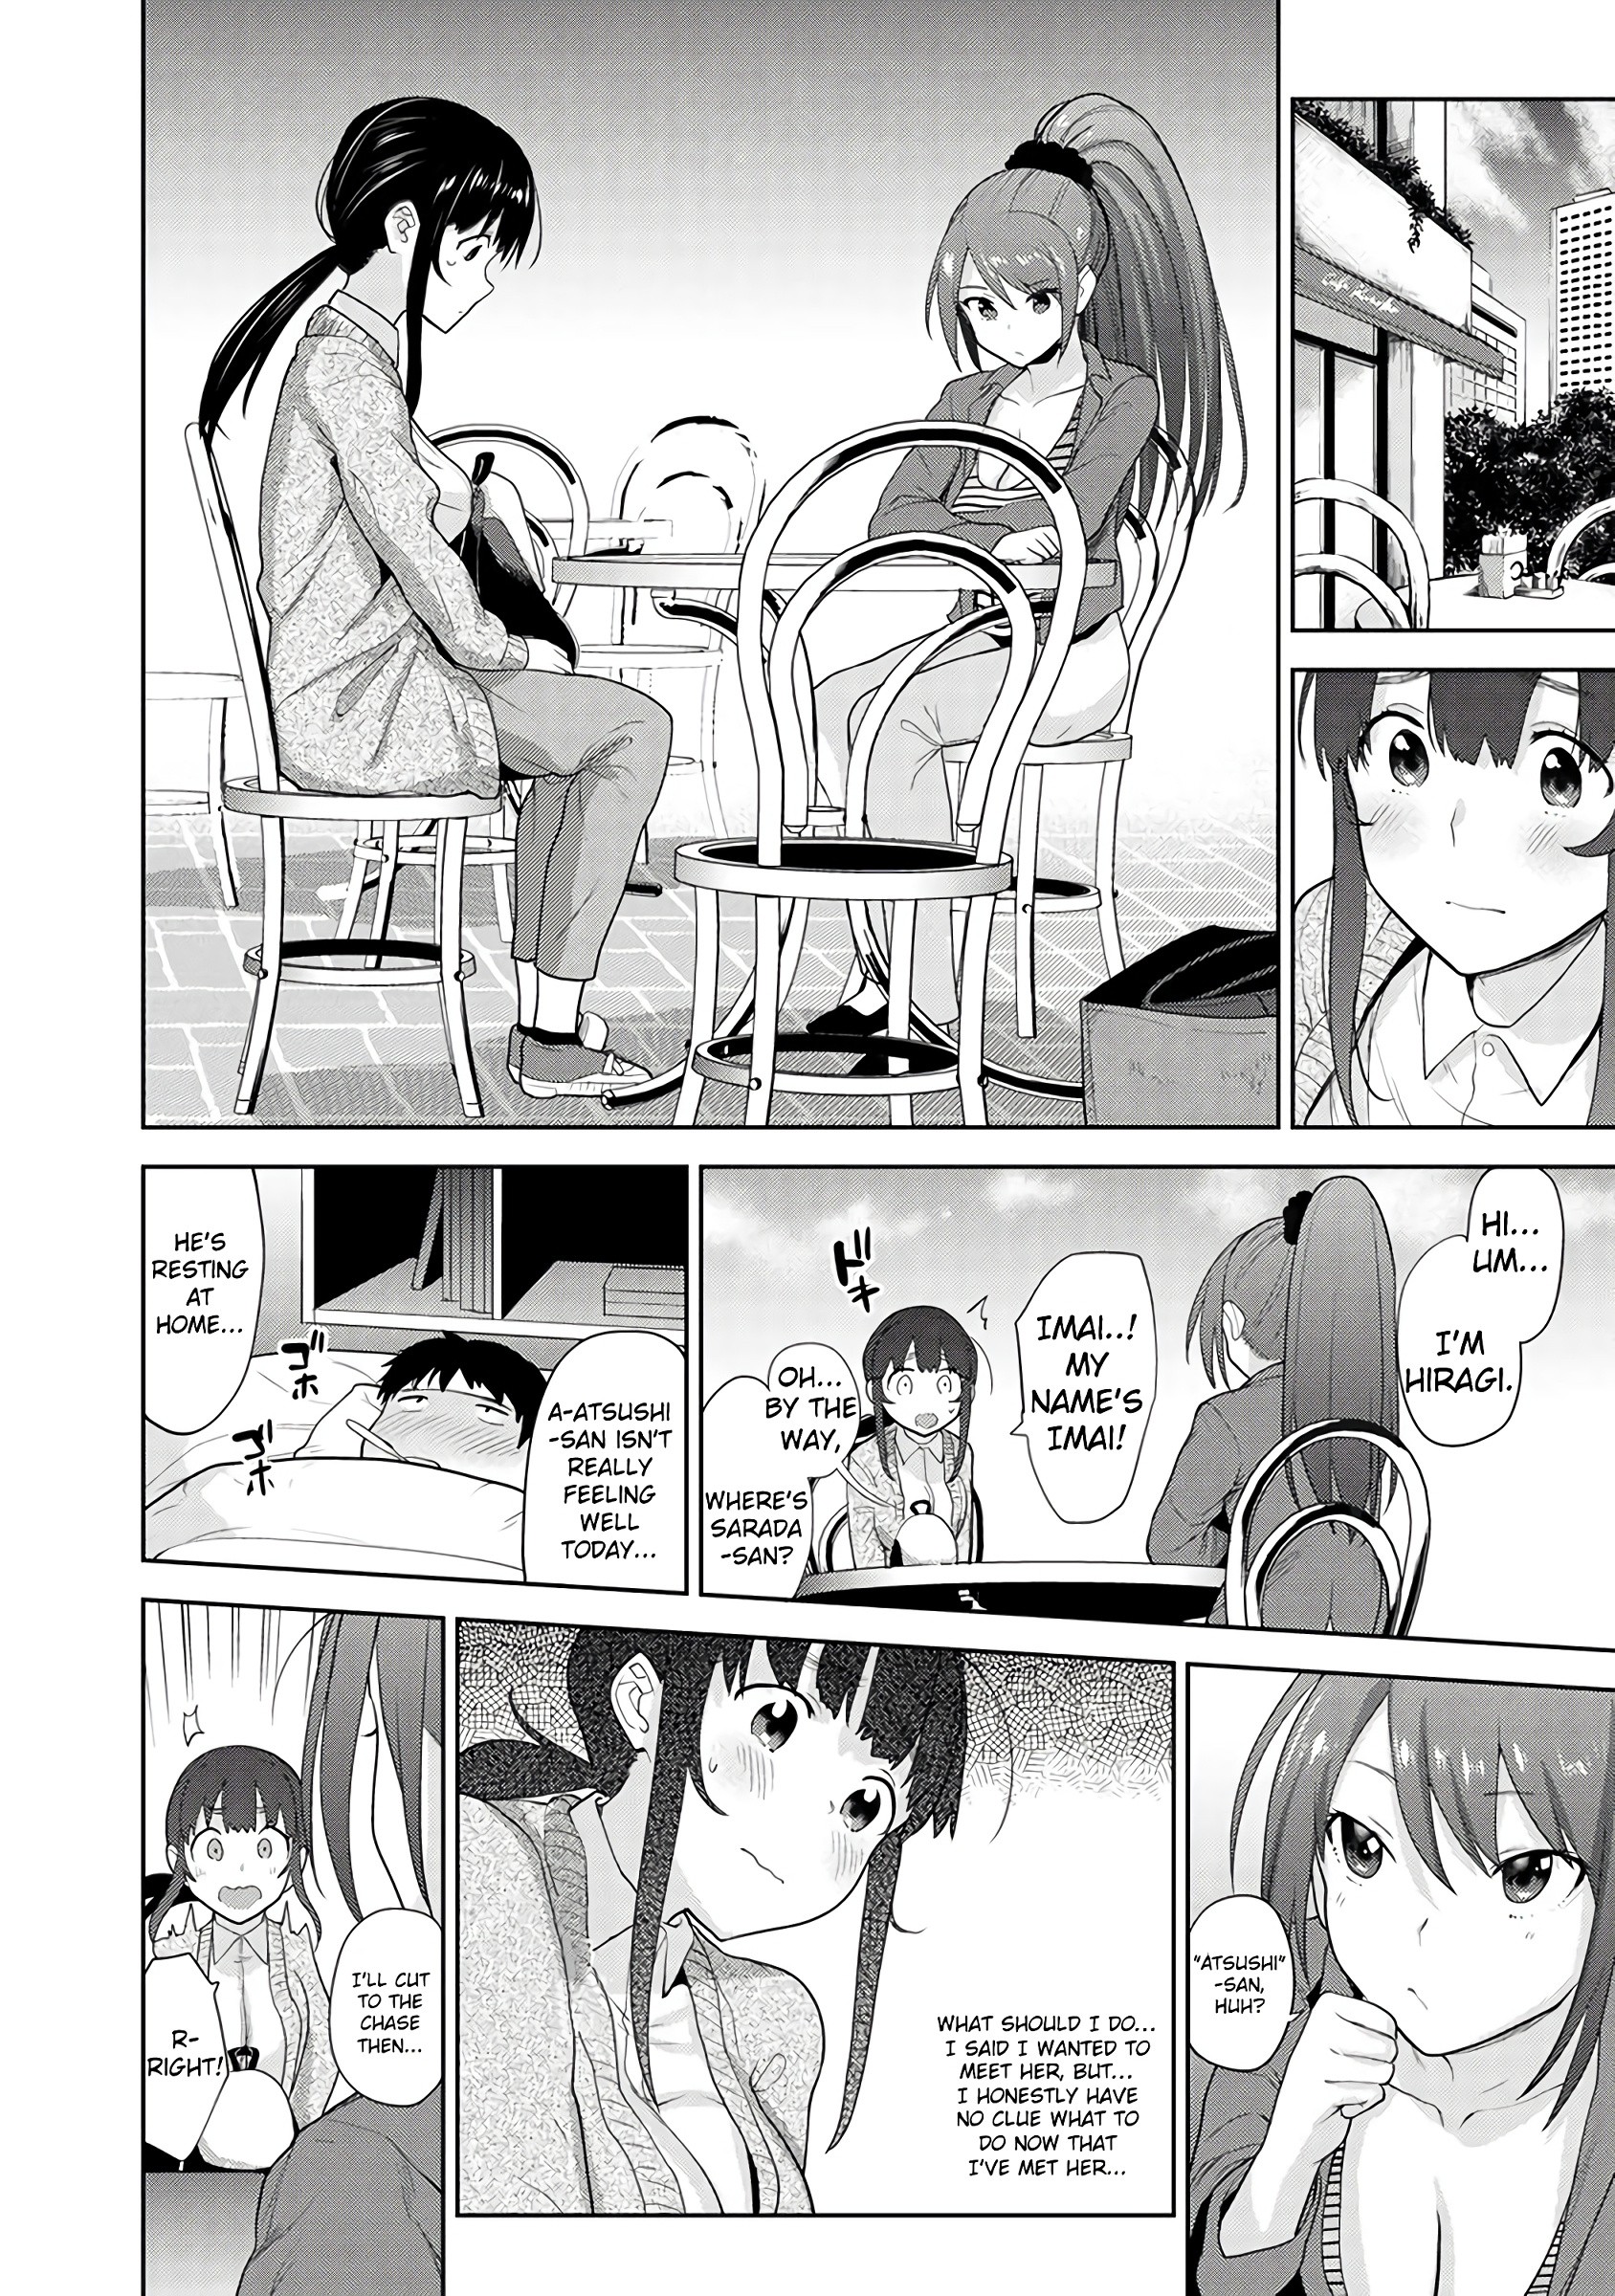 Method to Catch a Pretty Girl 9 hentai manga picture 10